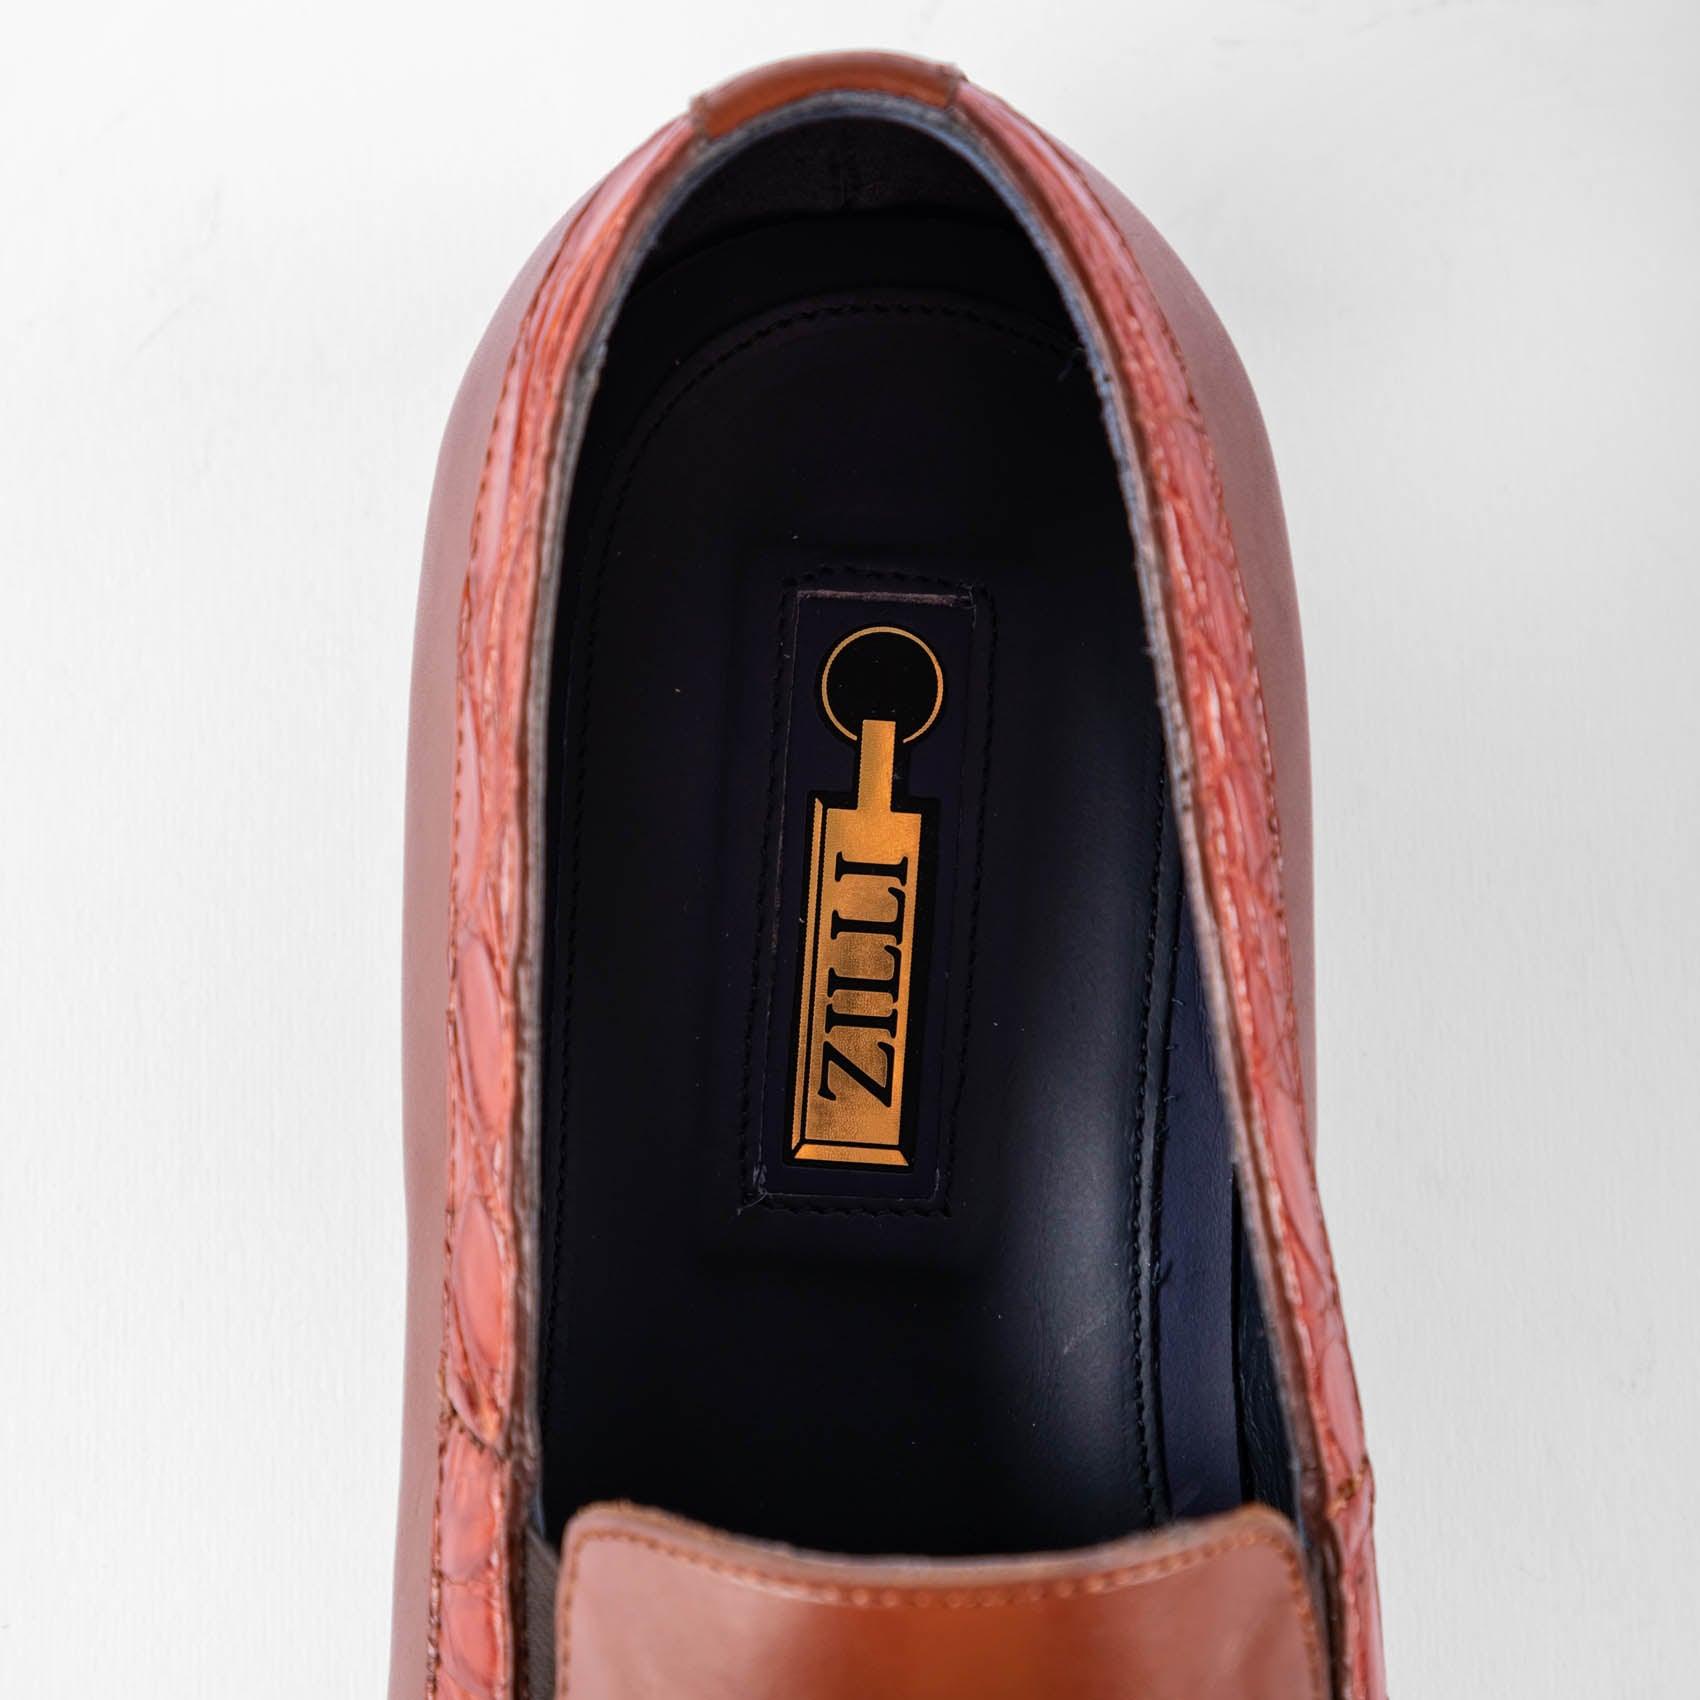 Shoes loafer smart casual calf leather with crocodile trim - ZILLI